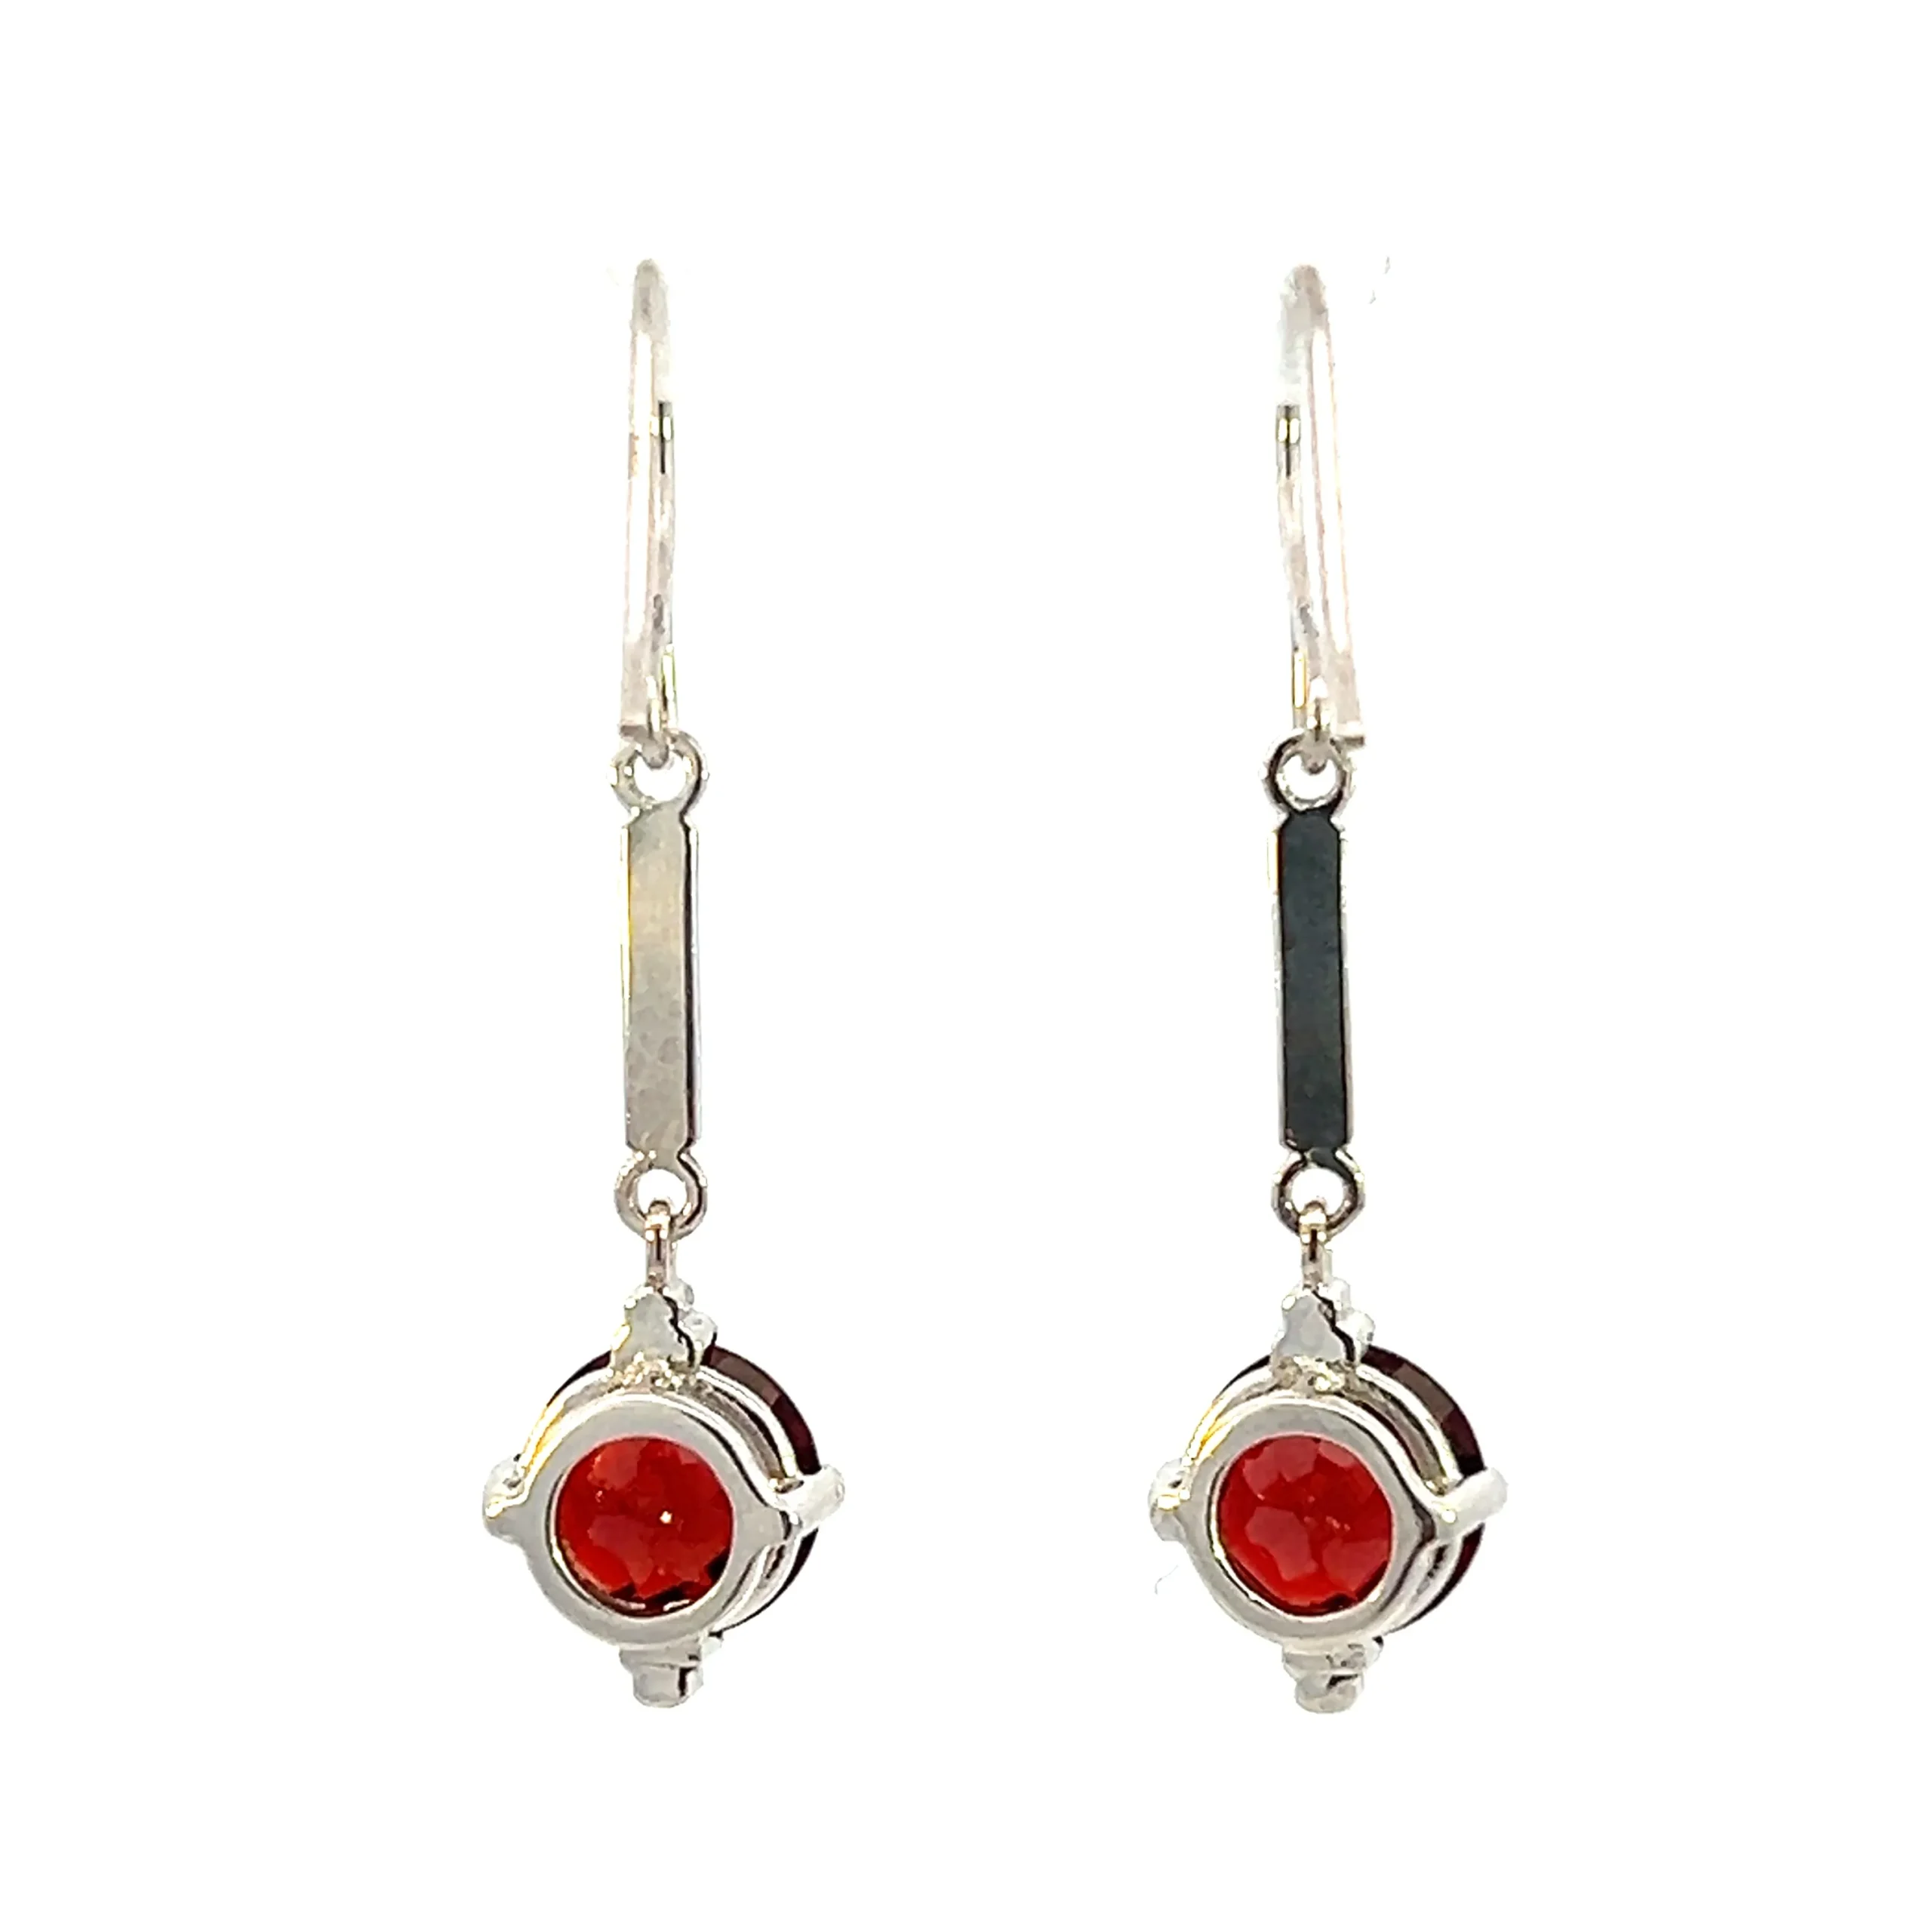 One estate pair of 14 karat white gold drop earrings with each earring featuring a thin polished silver bar accent that drops to an 8mm round checkerboard-faceted garnet in a four-prong setting